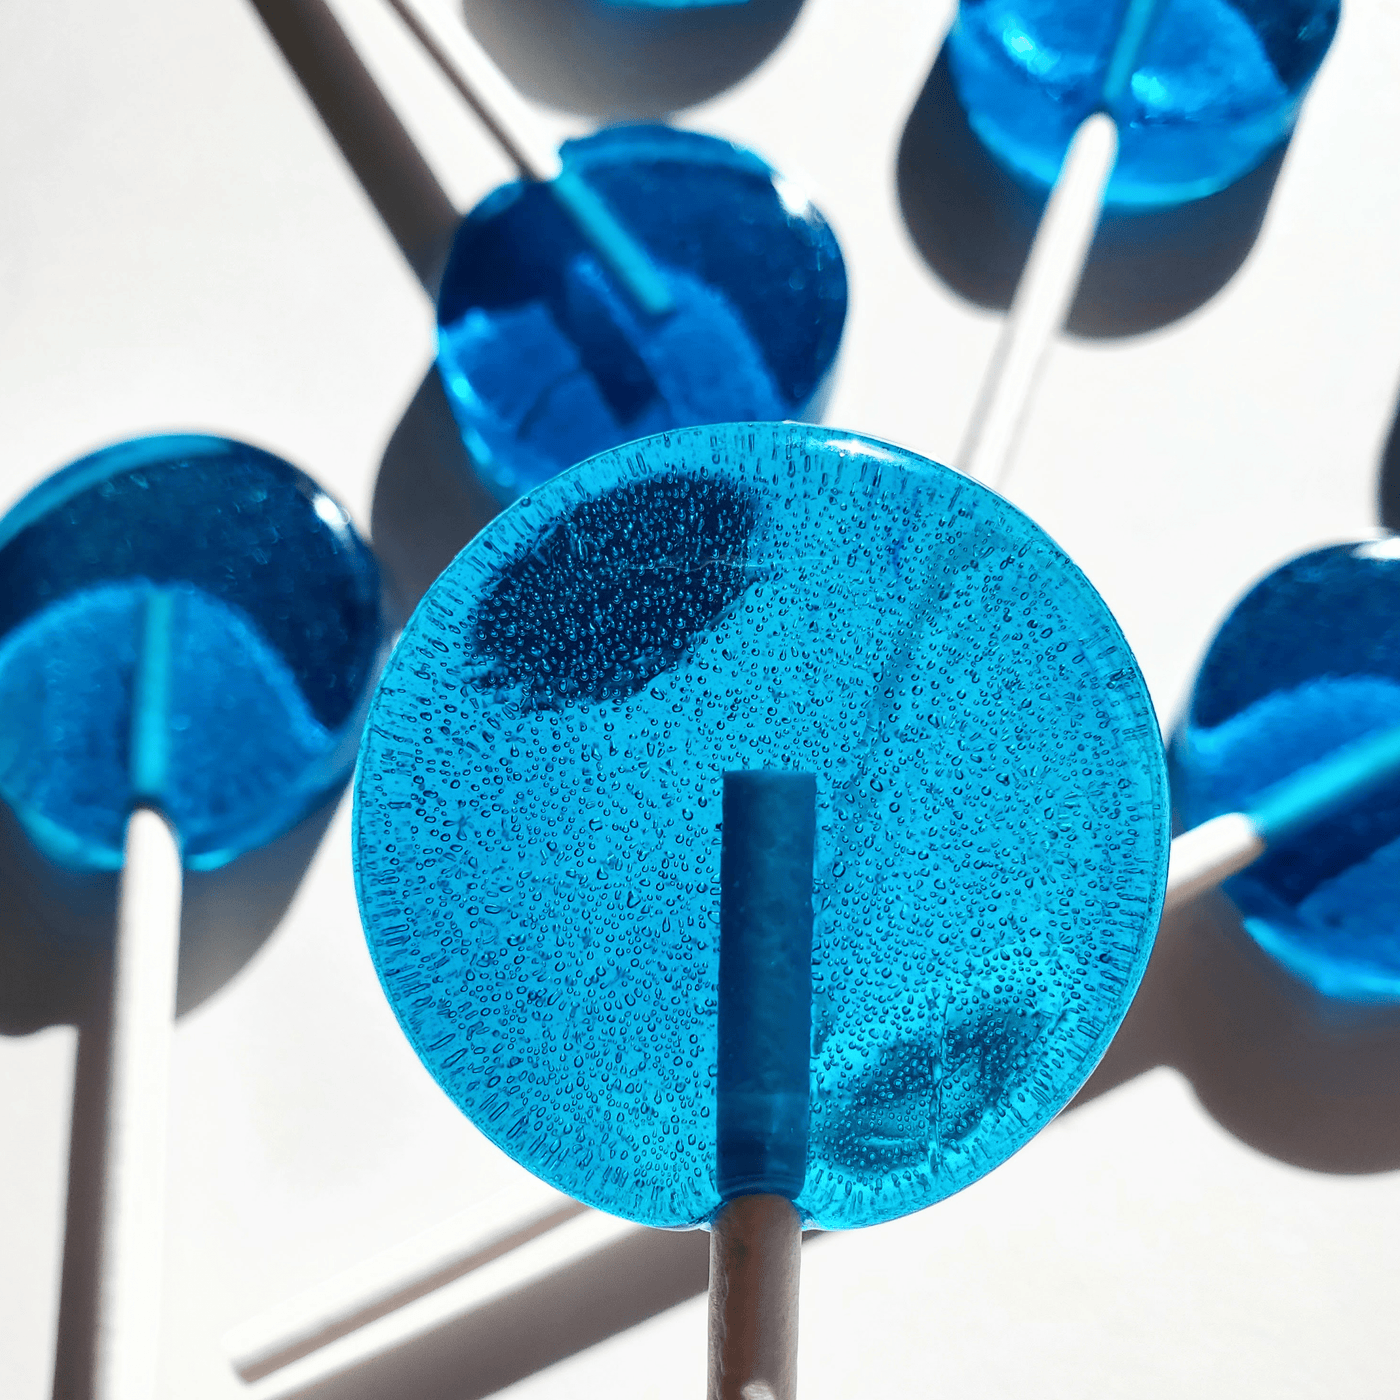 Lollipops | The Licker Store - The Local Space